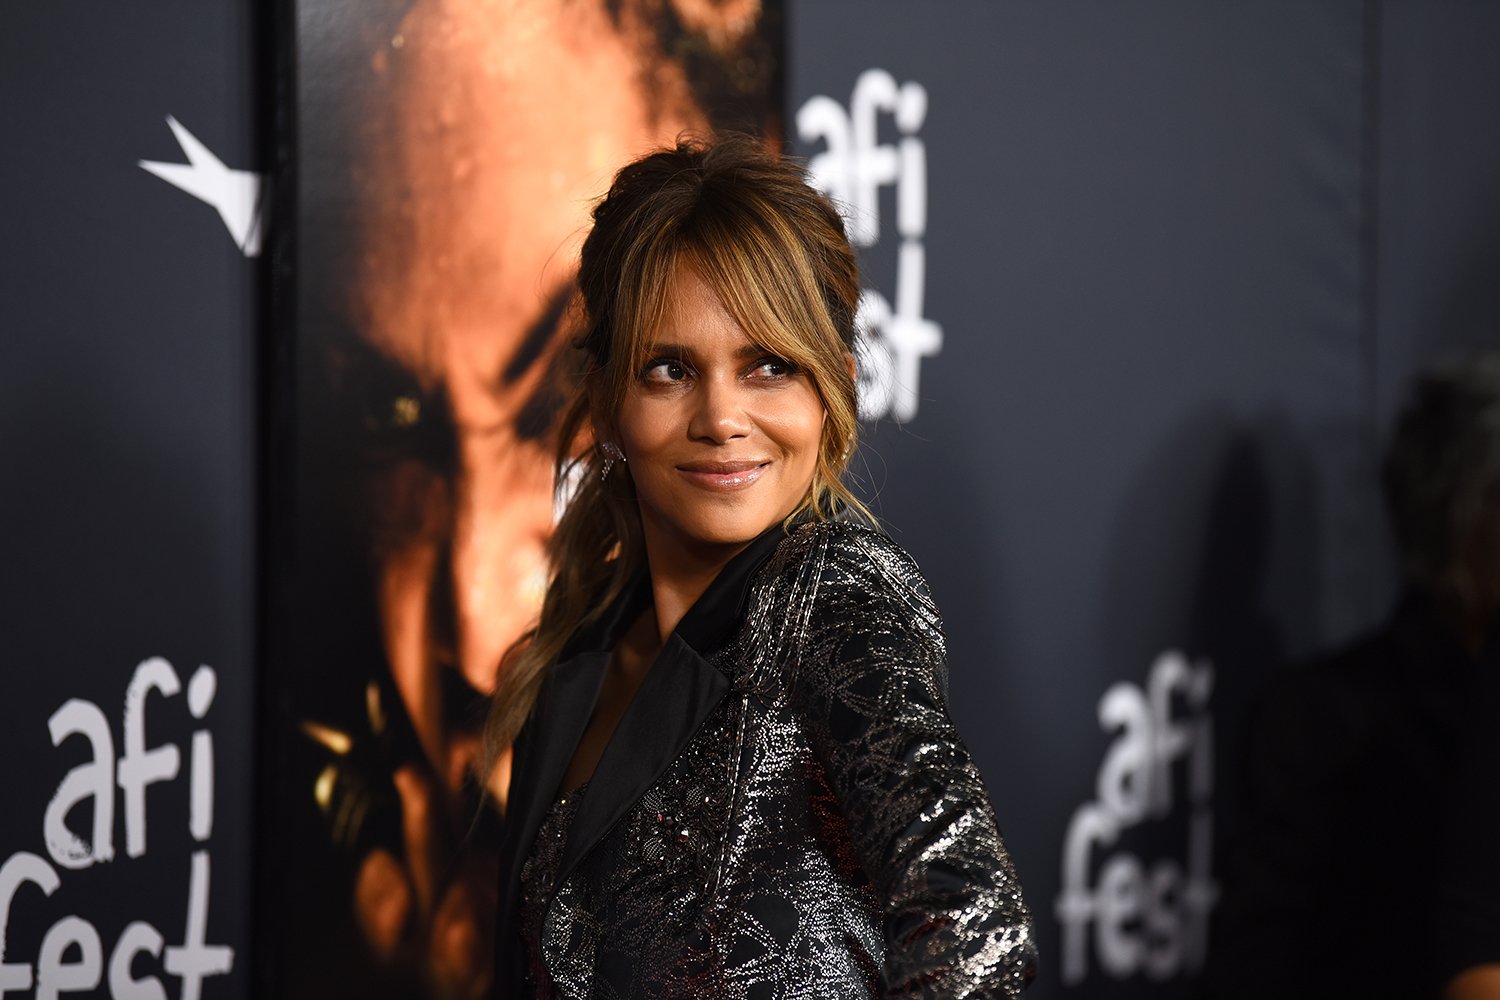 Catwoman star Halle Berry at the screening for her new film, Bruised